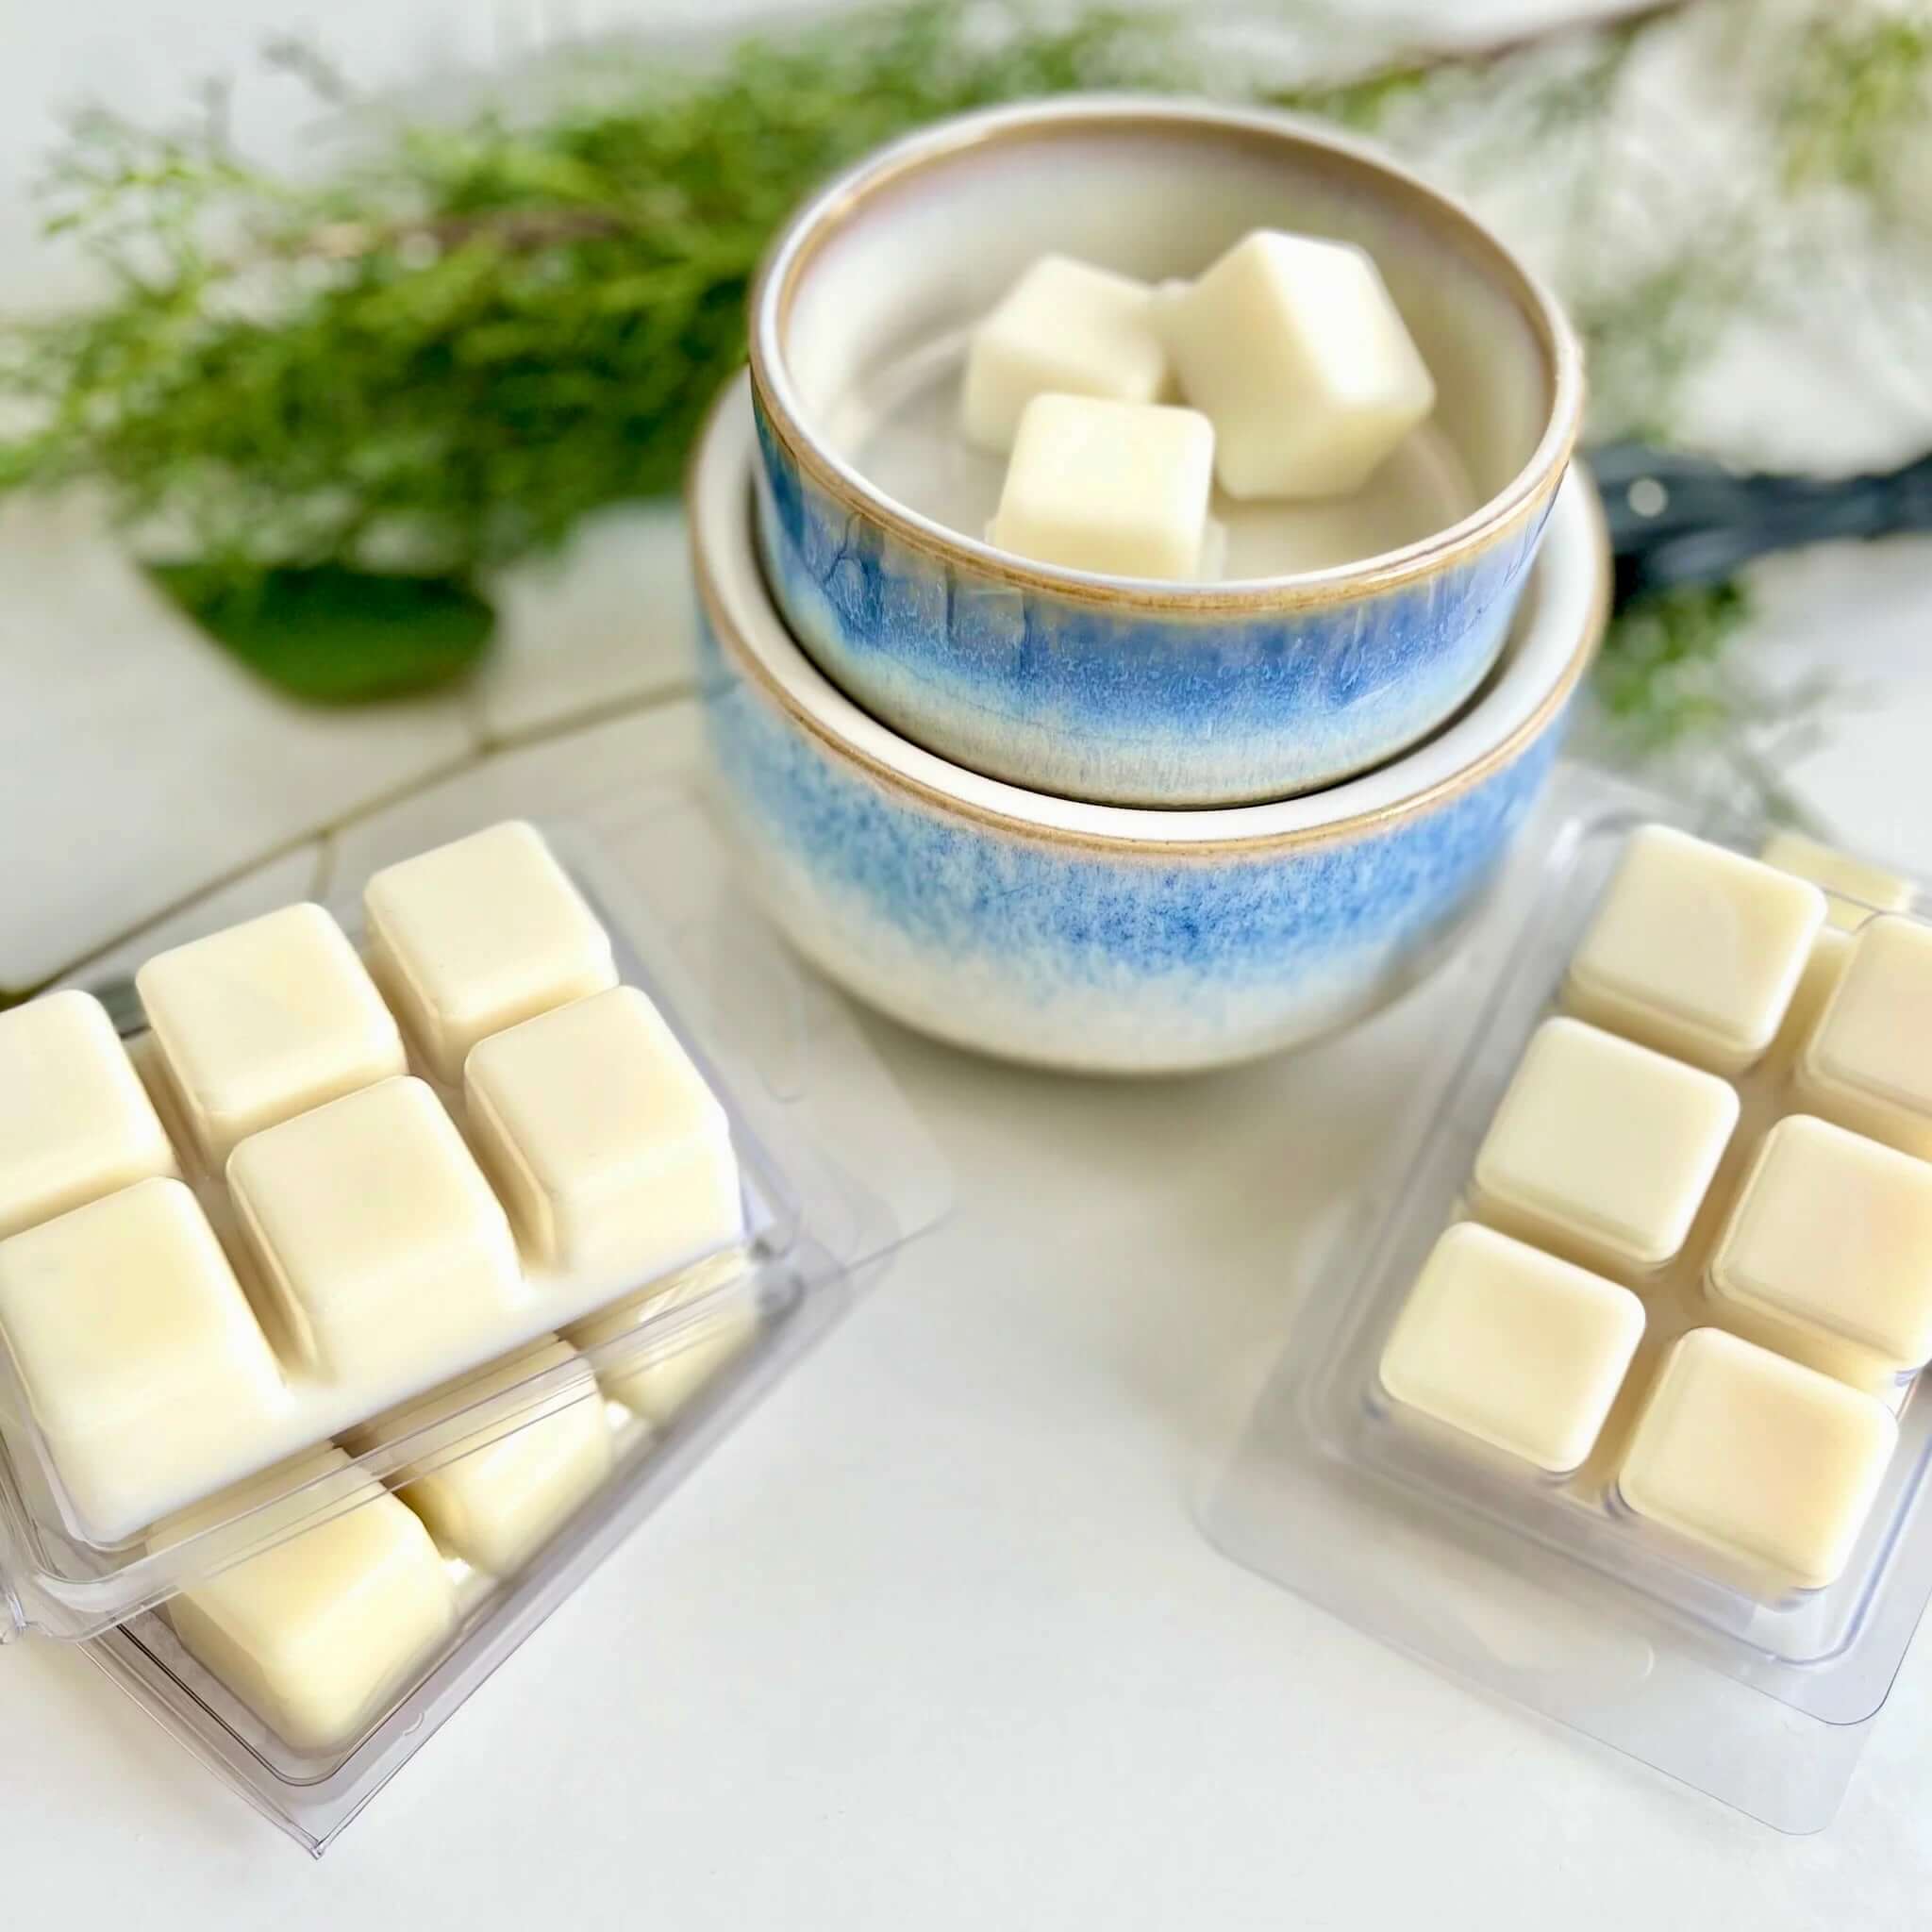 Buy custom made nontoxic soy-coco wax melts in 4 Packs. Custom, made to order, in Ohio.